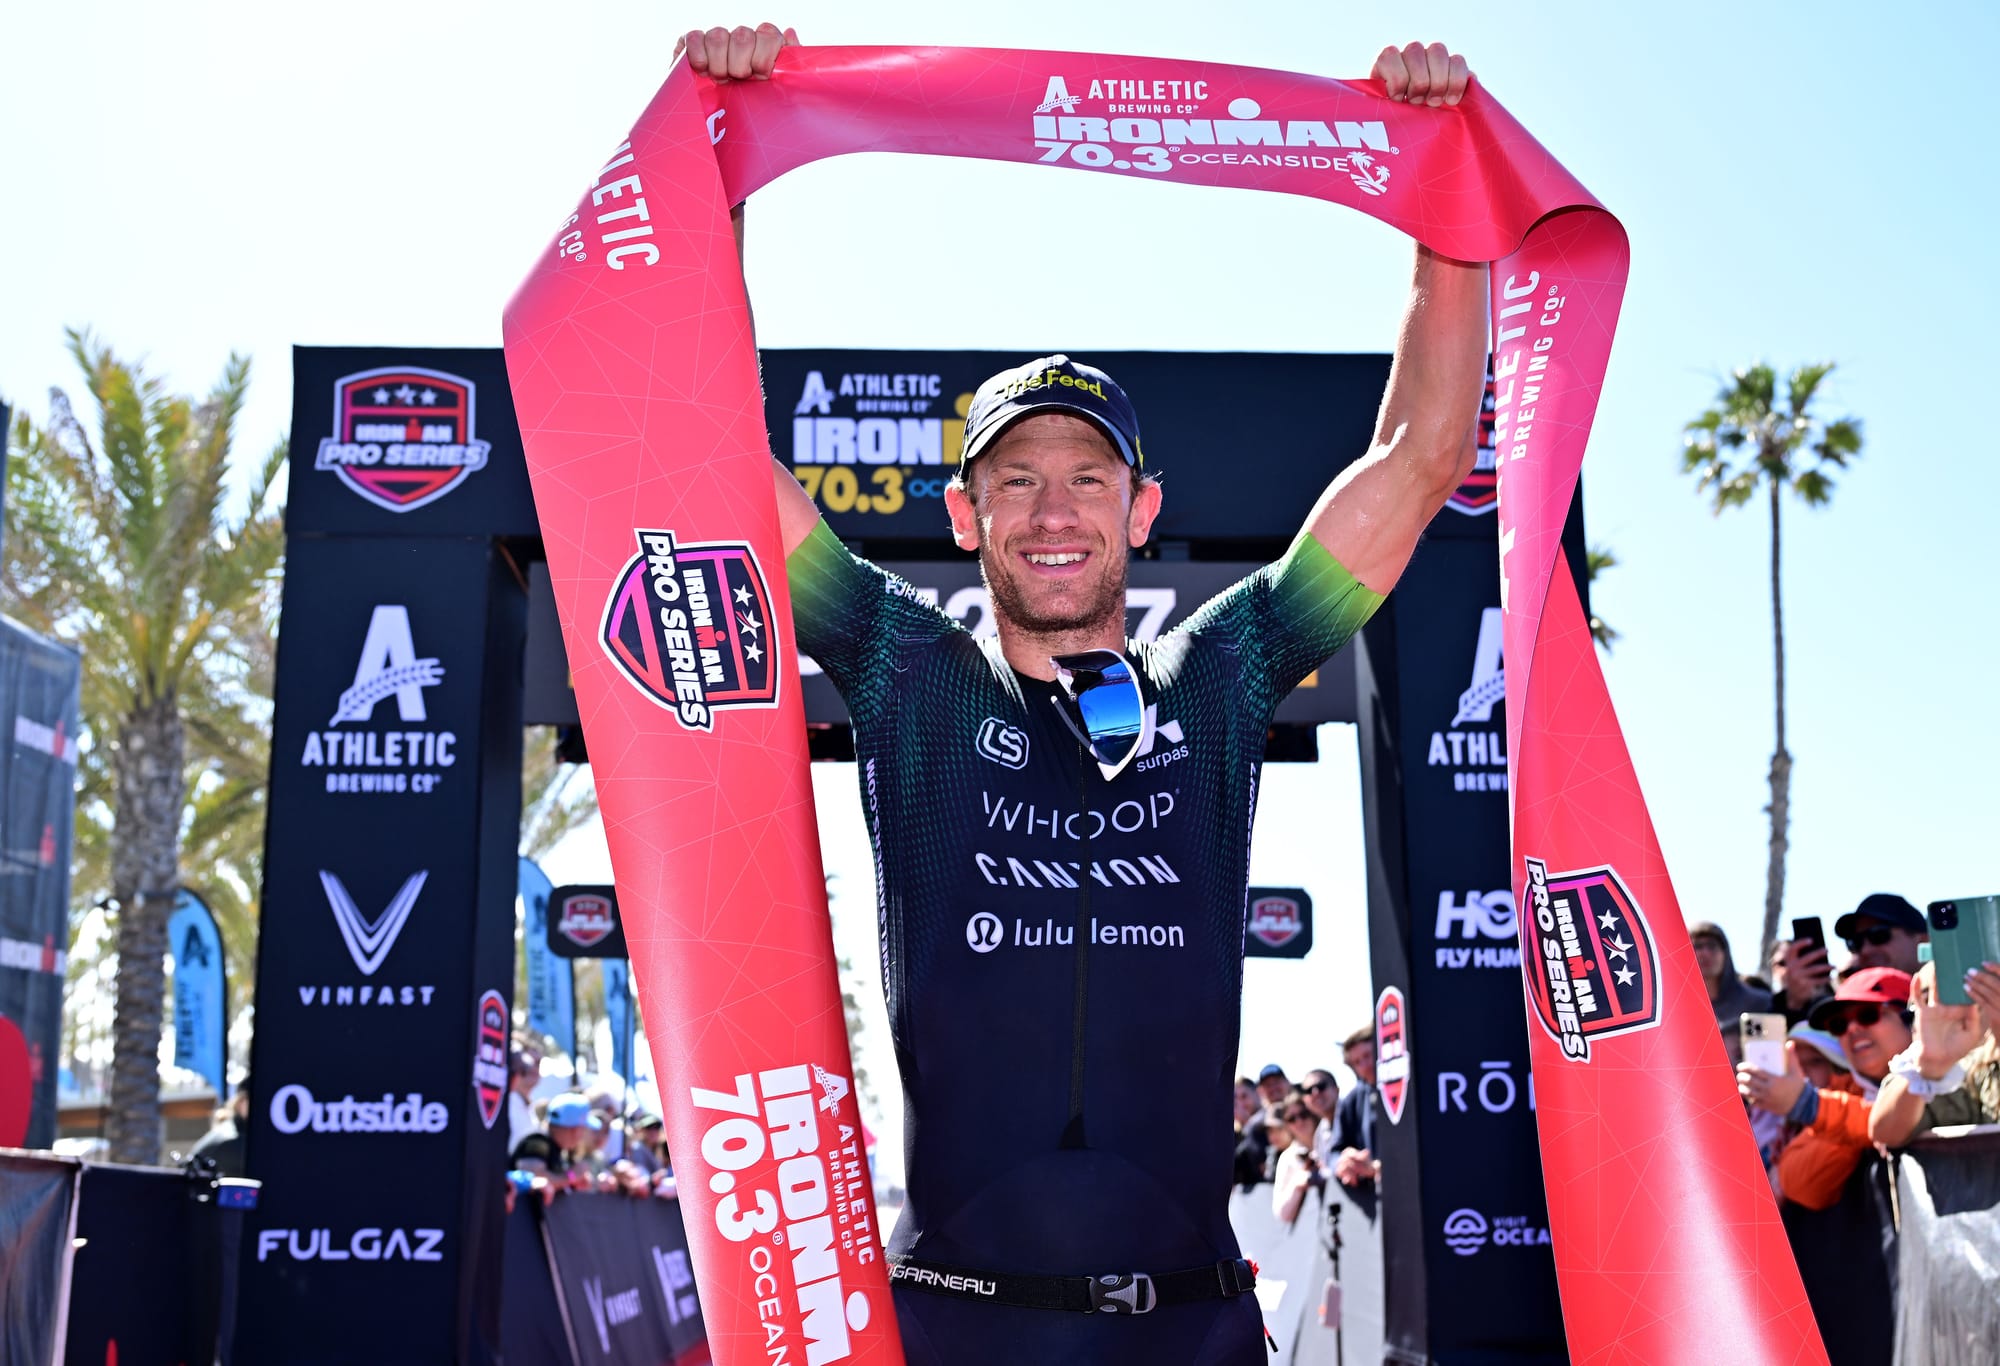 Knibb and Sanders Win in Thrilling Ironman 70.3 Oceanside Pro Series Opener